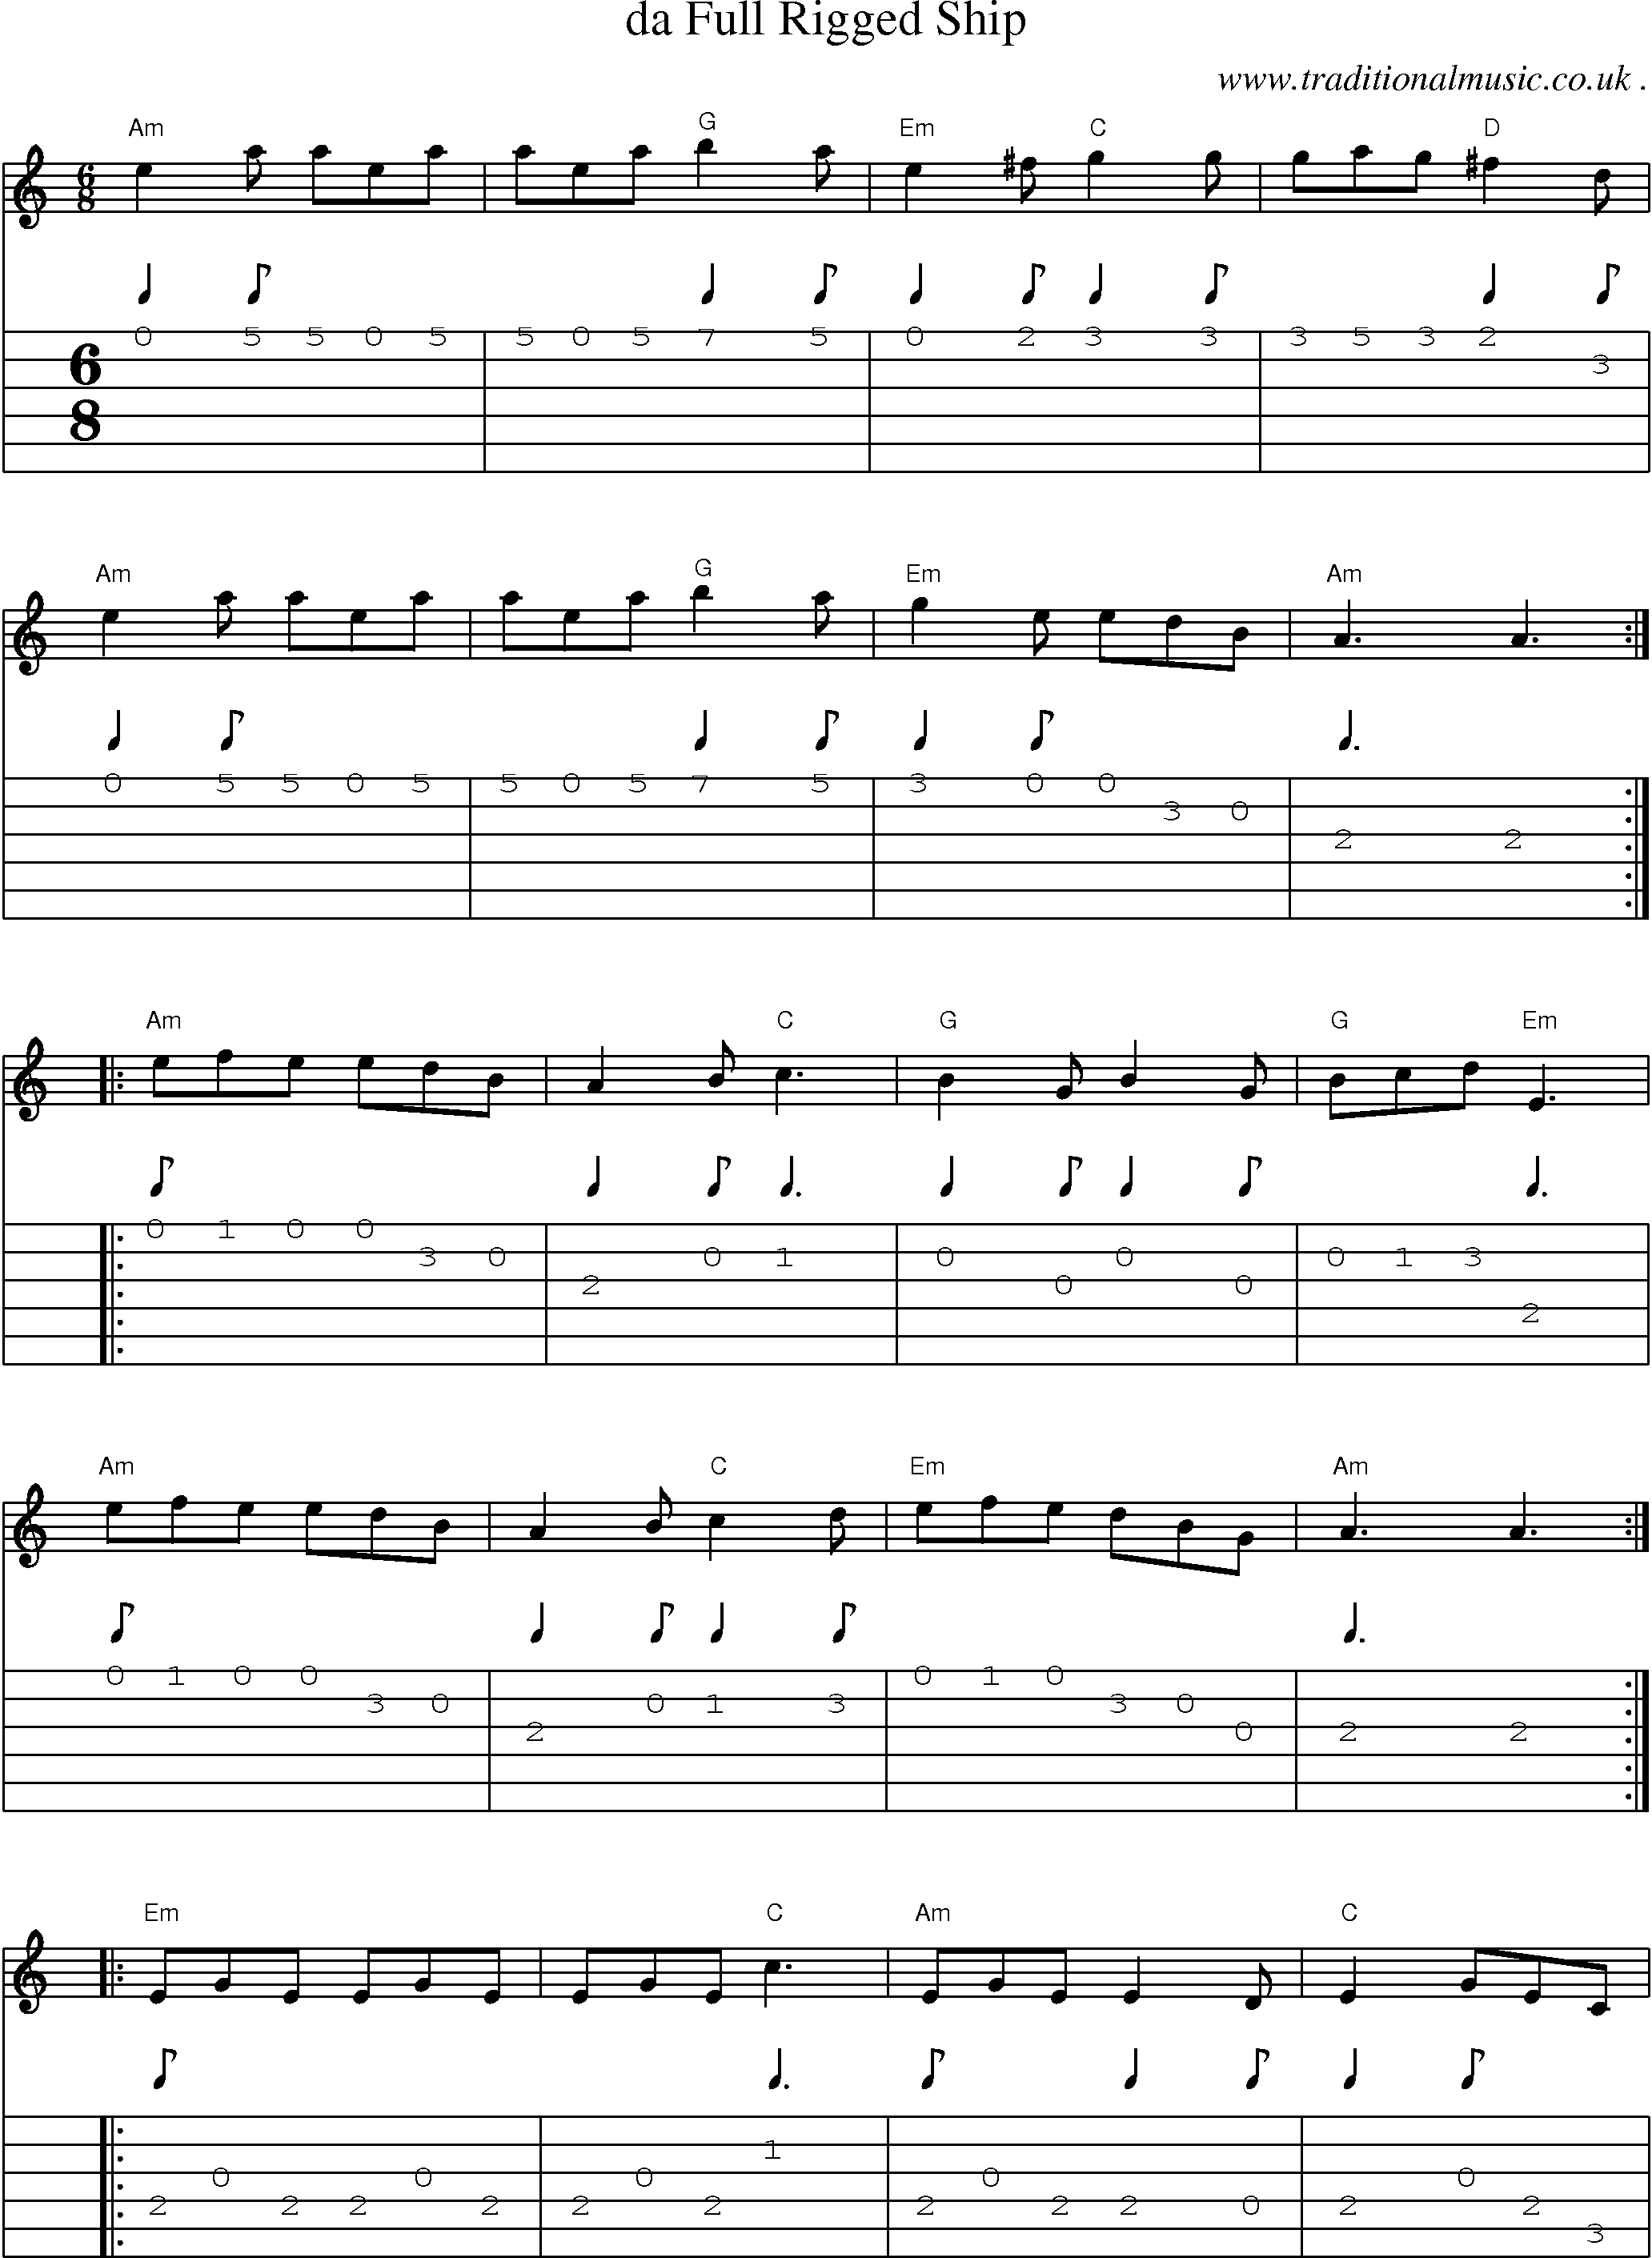 Sheet-music  score, Chords and Guitar Tabs for Da Full Rigged Ship